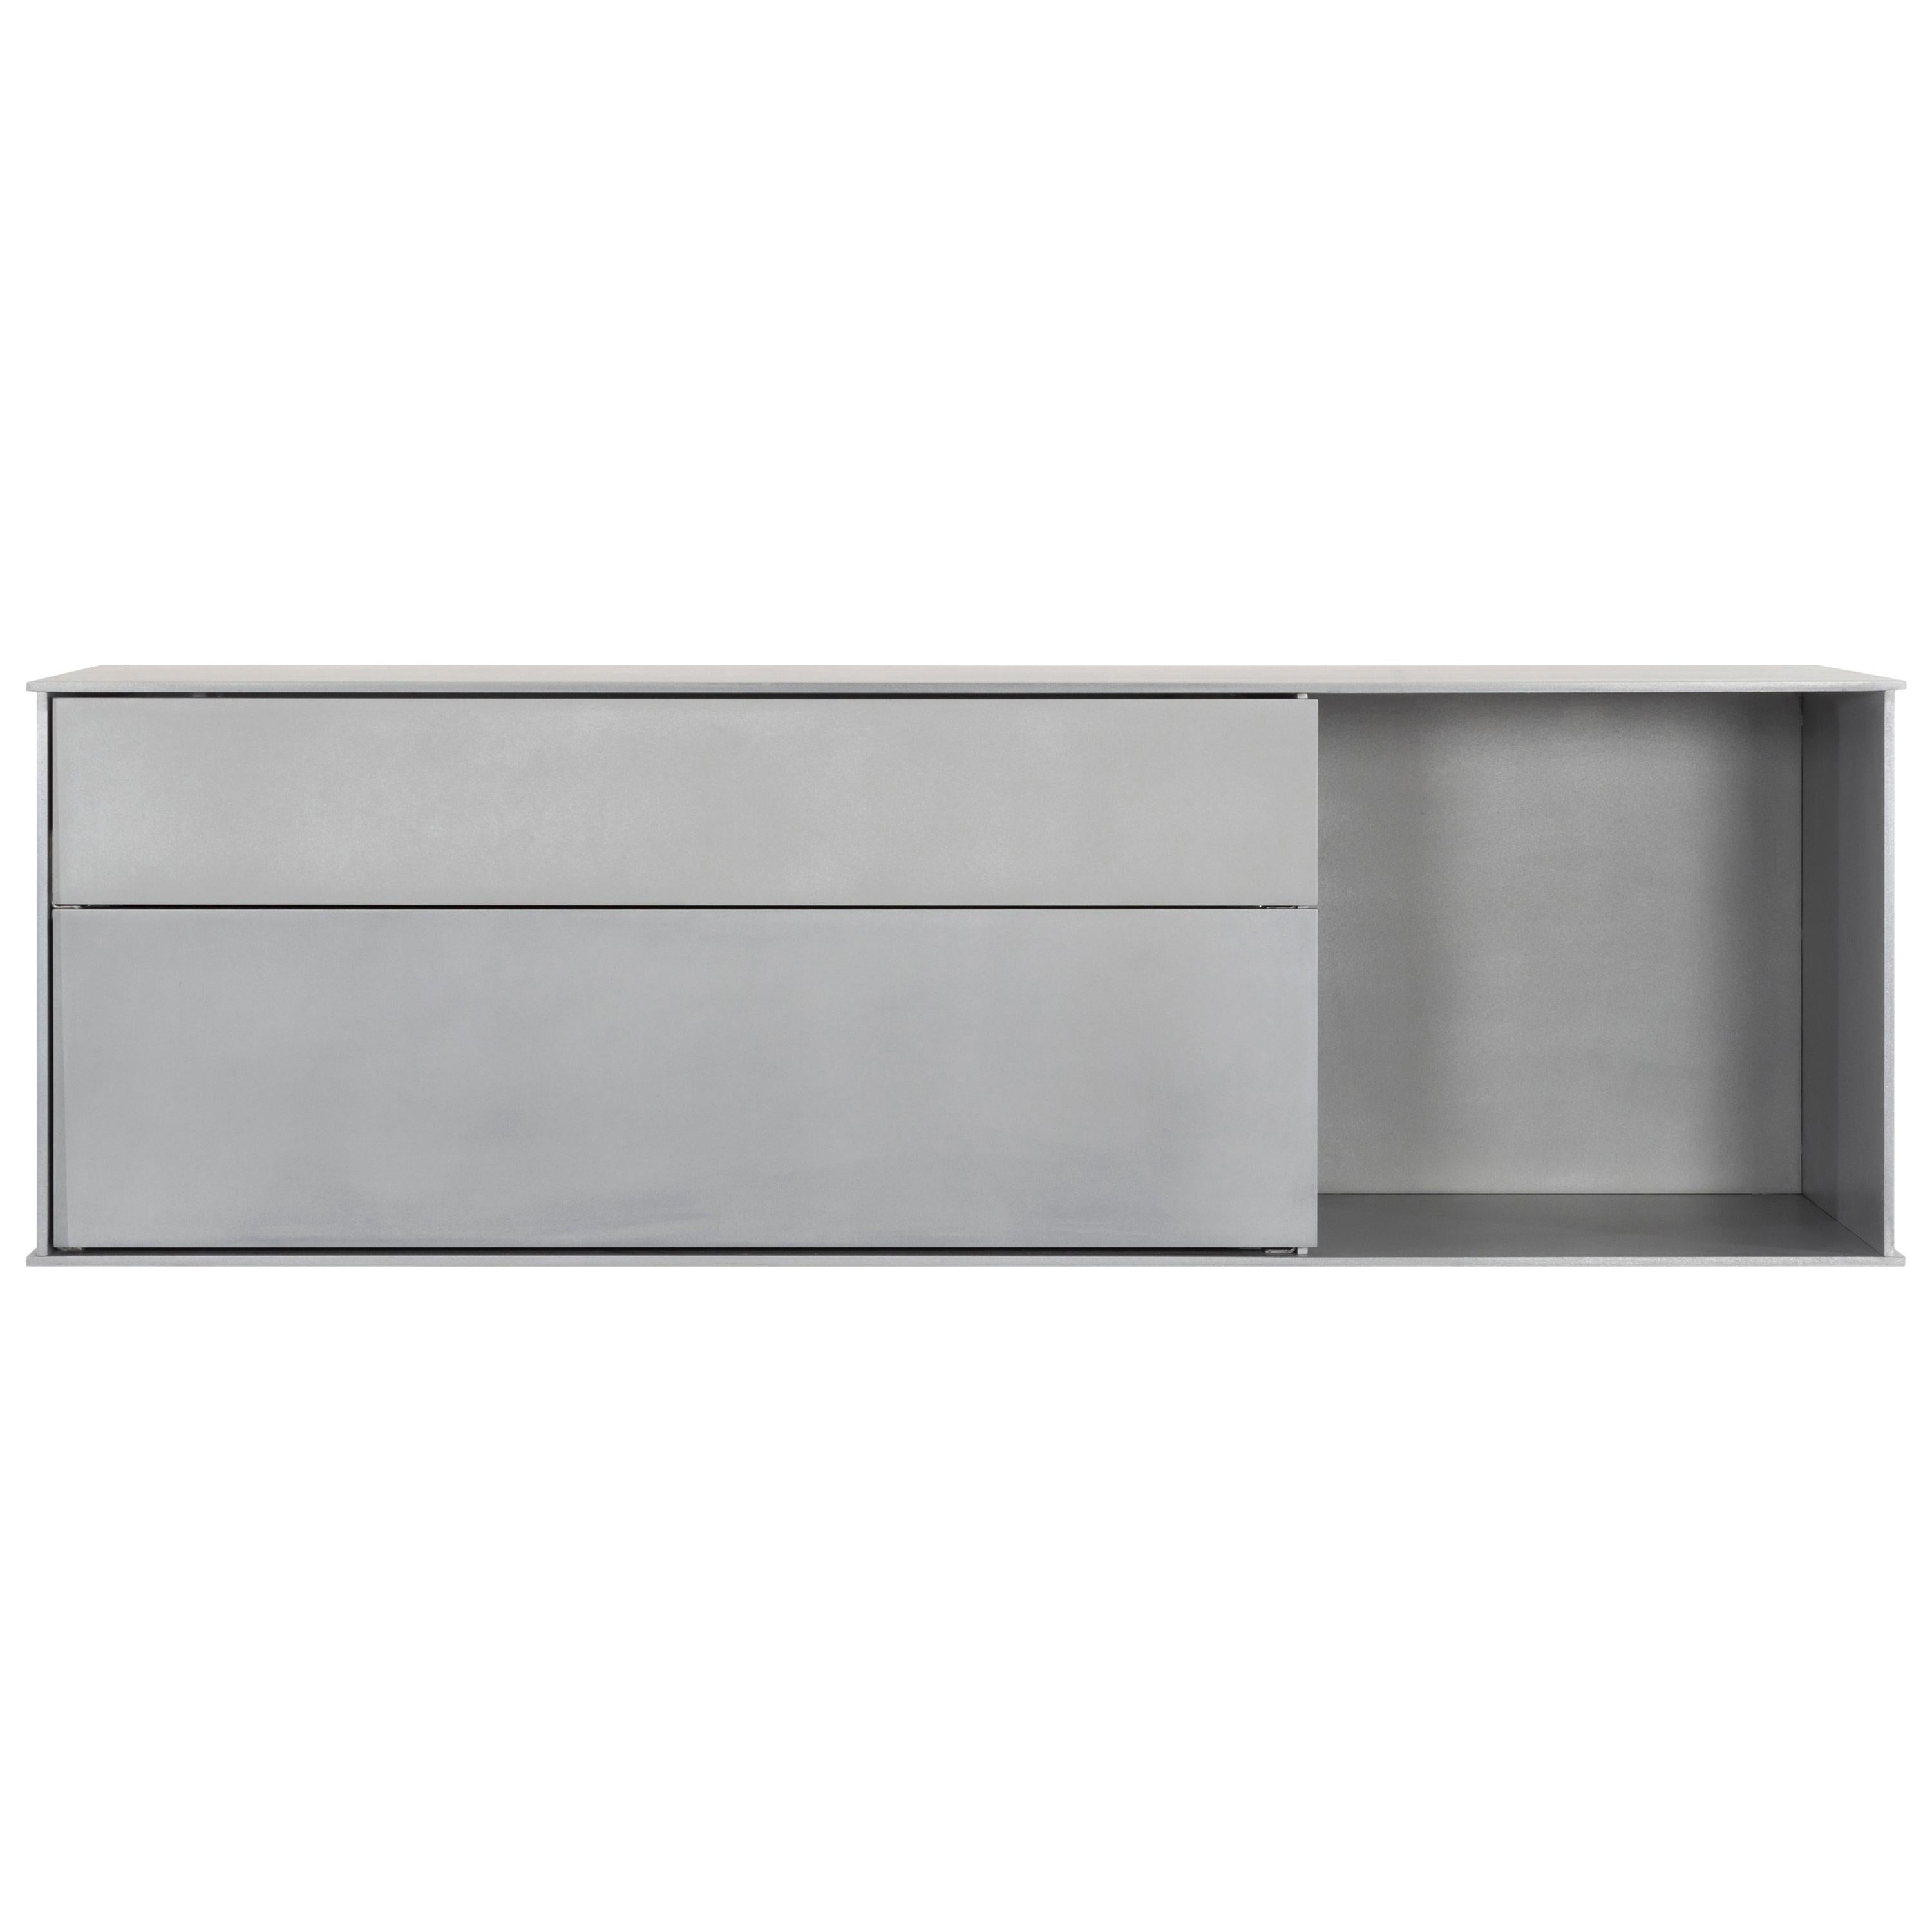 OG Wall-Mounted Shelf with Drawers in Waxed Aluminum Plate by Jonathan Nesci For Sale